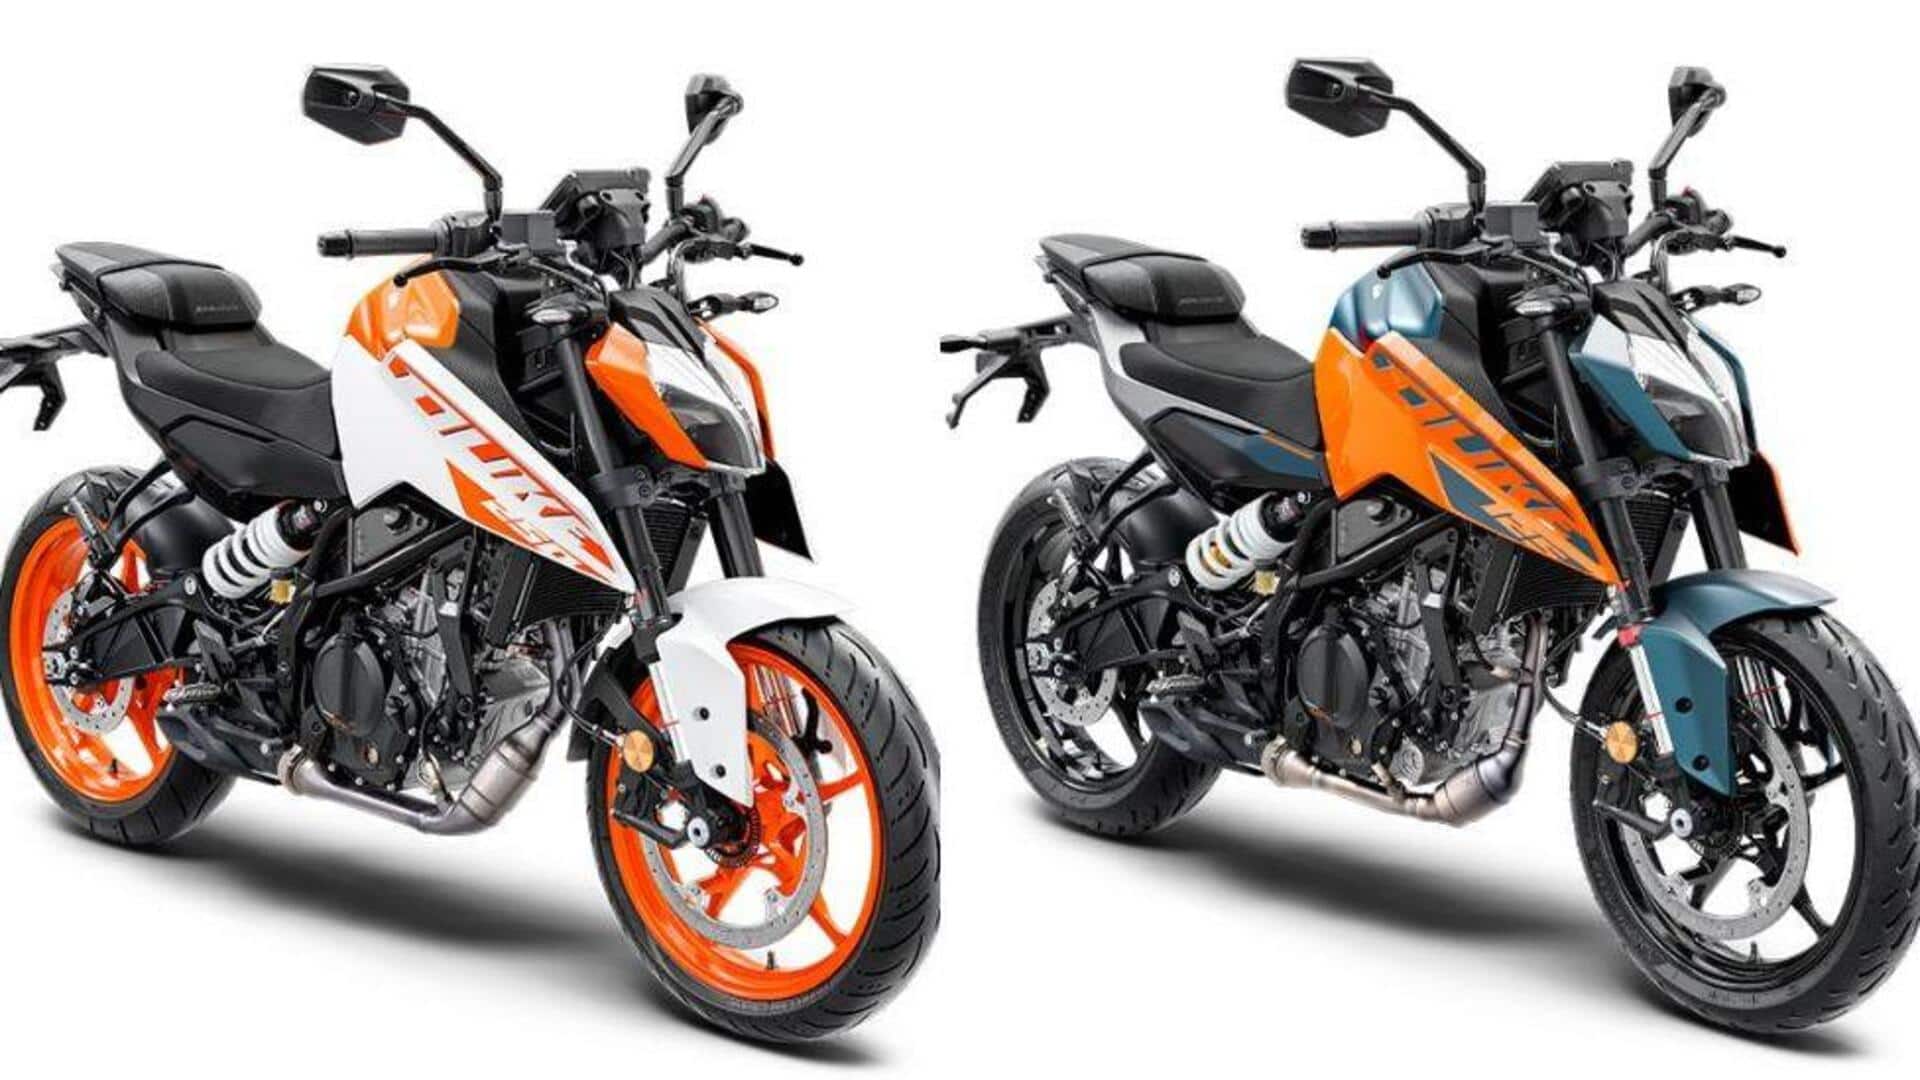 KTM recalls 390 Duke and 125 Duke in Europe to resolve head light issue -  India Today